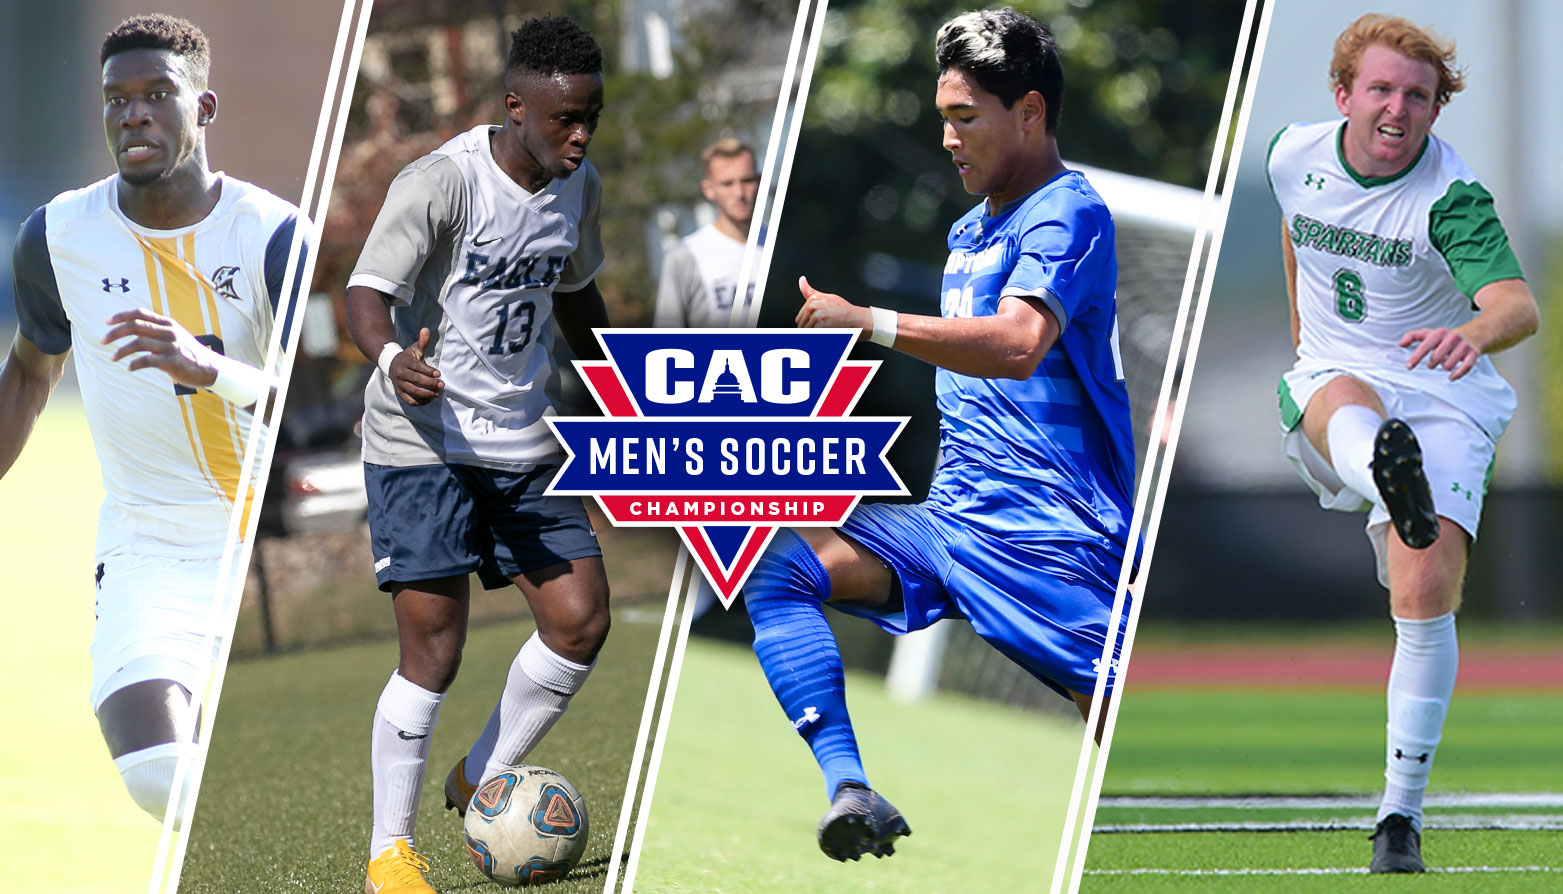 St. Mary's & York Victorious in CAC Men's Soccer Tournament Quarterfinals